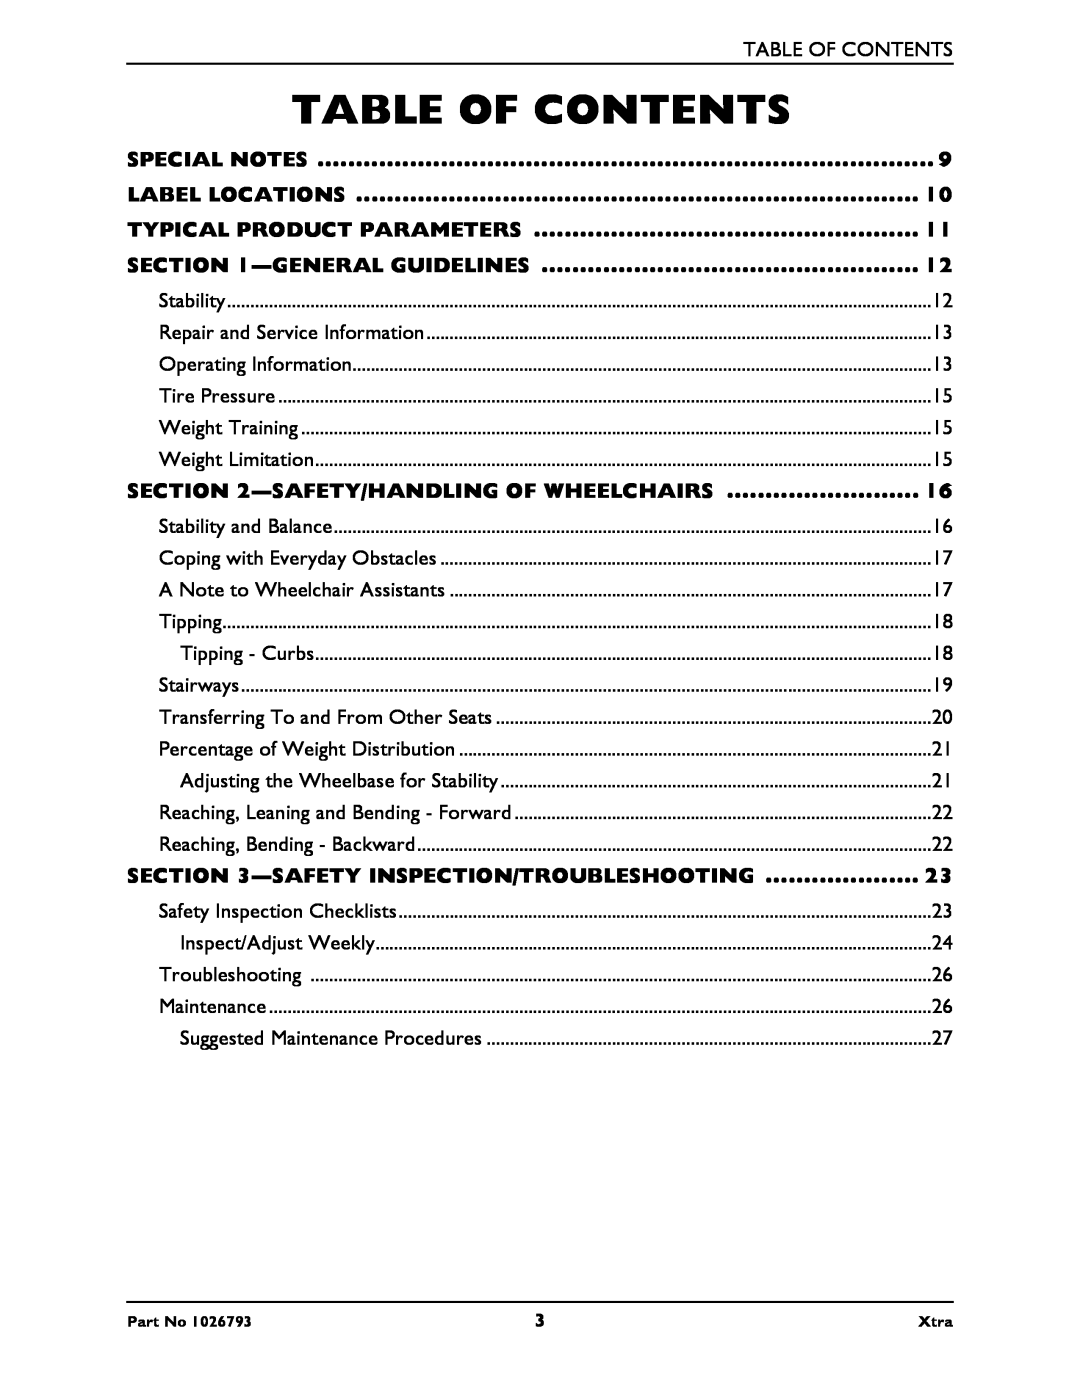 Invacare 1026793 Table Of Contents, Special Notes, Label Locations, Typical Product Parameters, General Guidelines, Xtra 